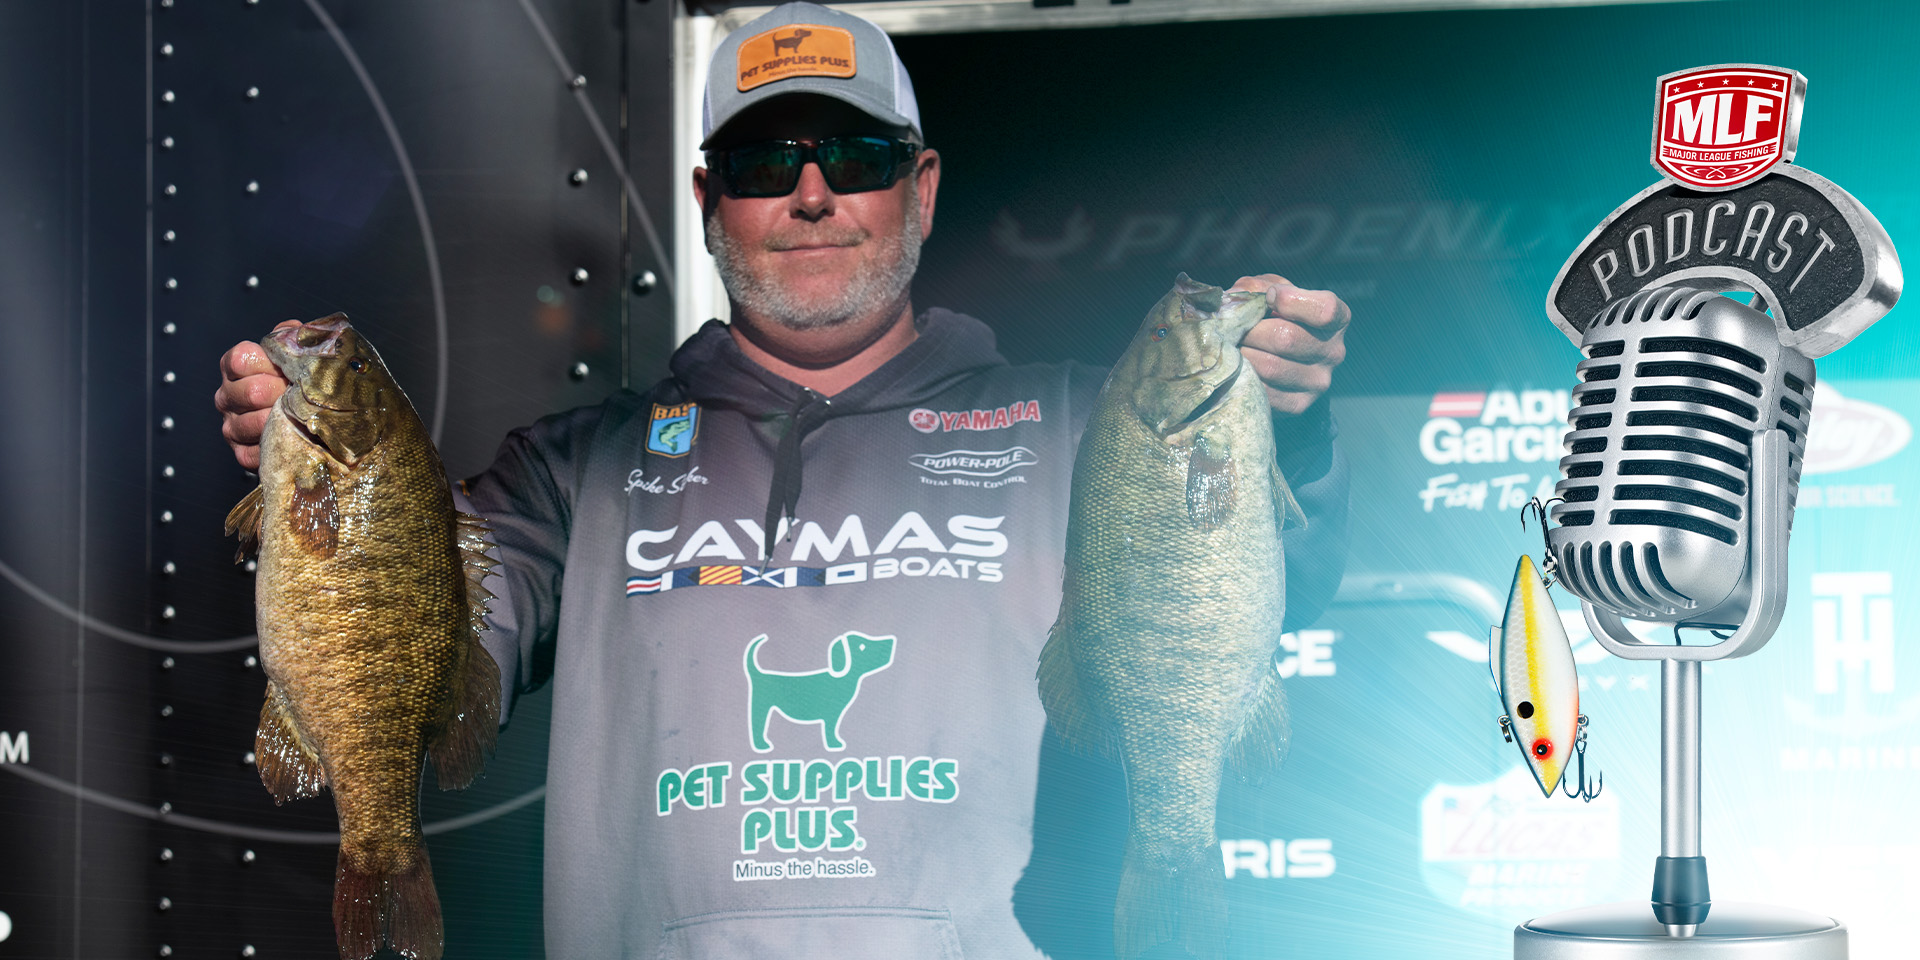 Podcast: Spike Stoker on His St. Lawrence River Win - Major League Fishing